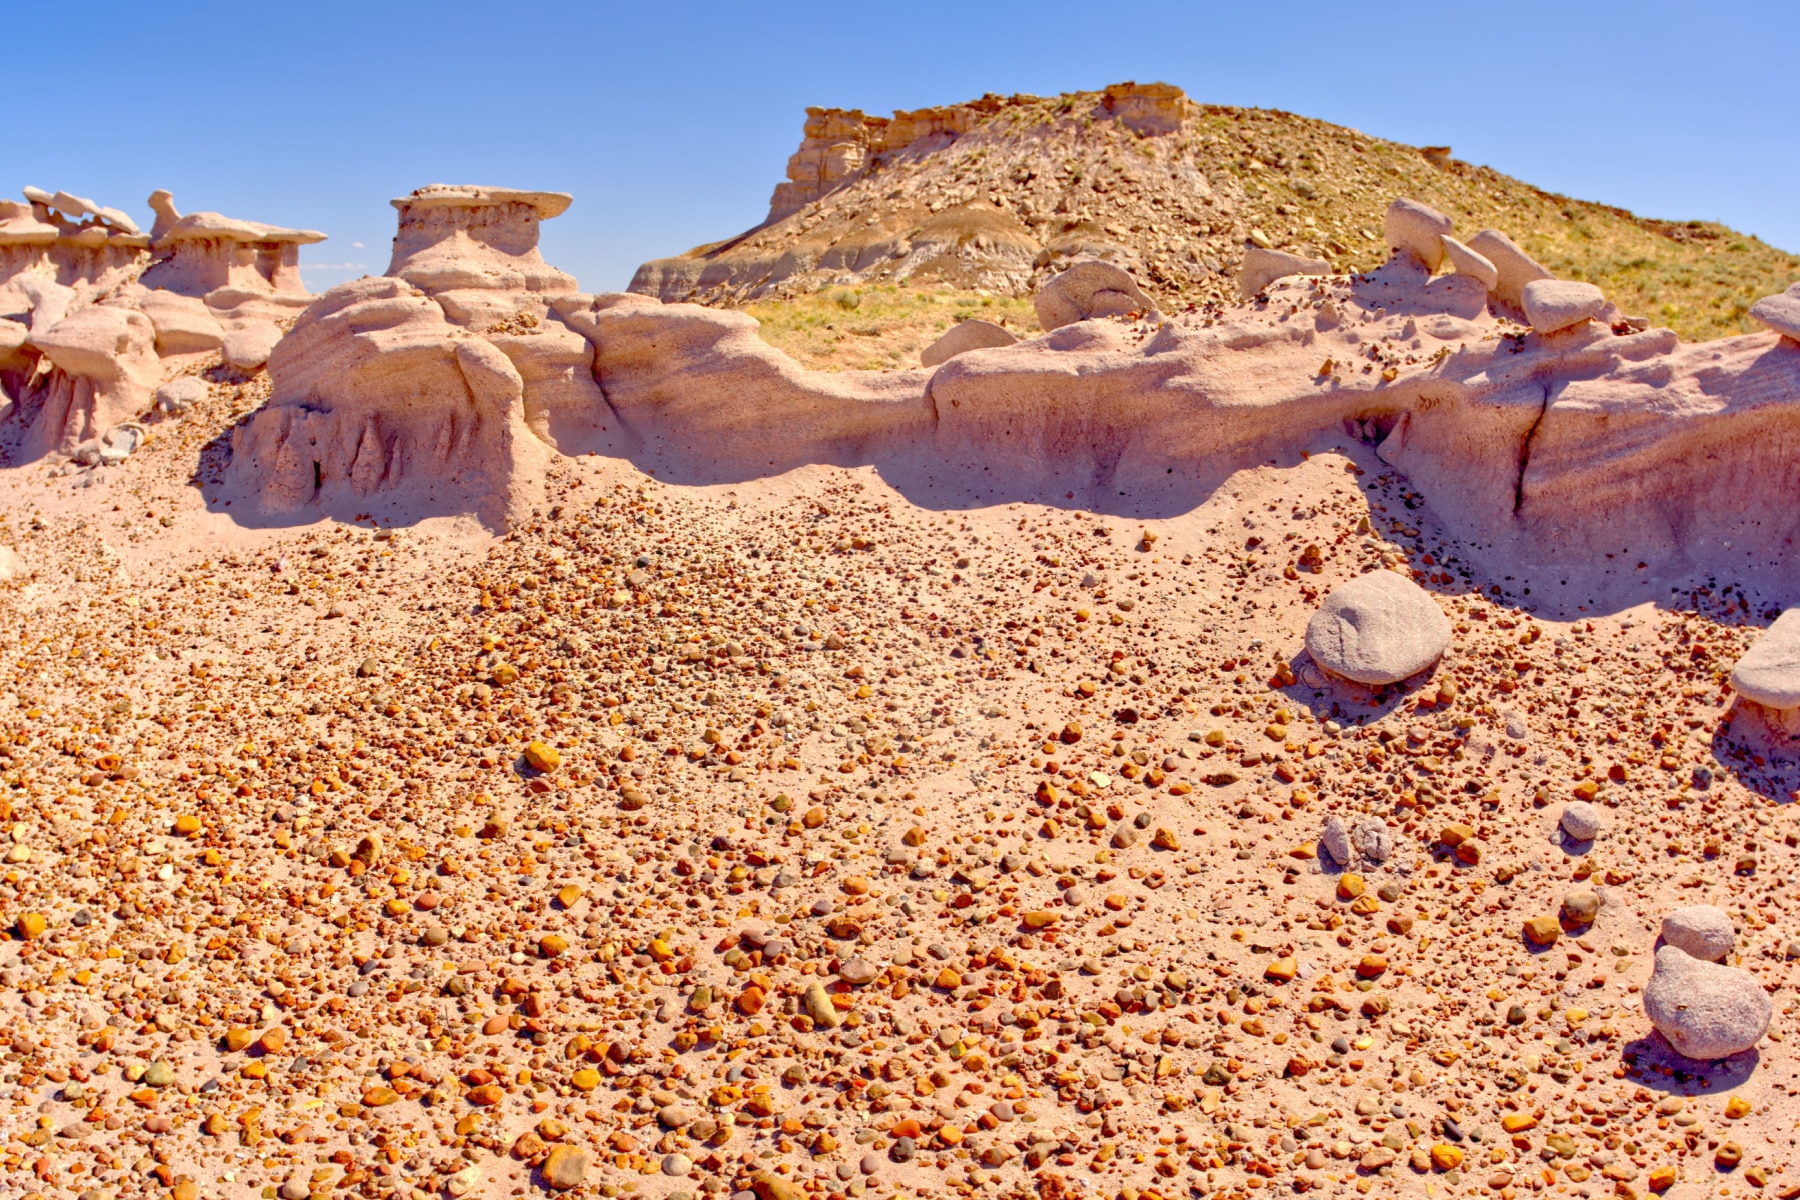 The sandcastle formations in Petrified Forest Arizona.